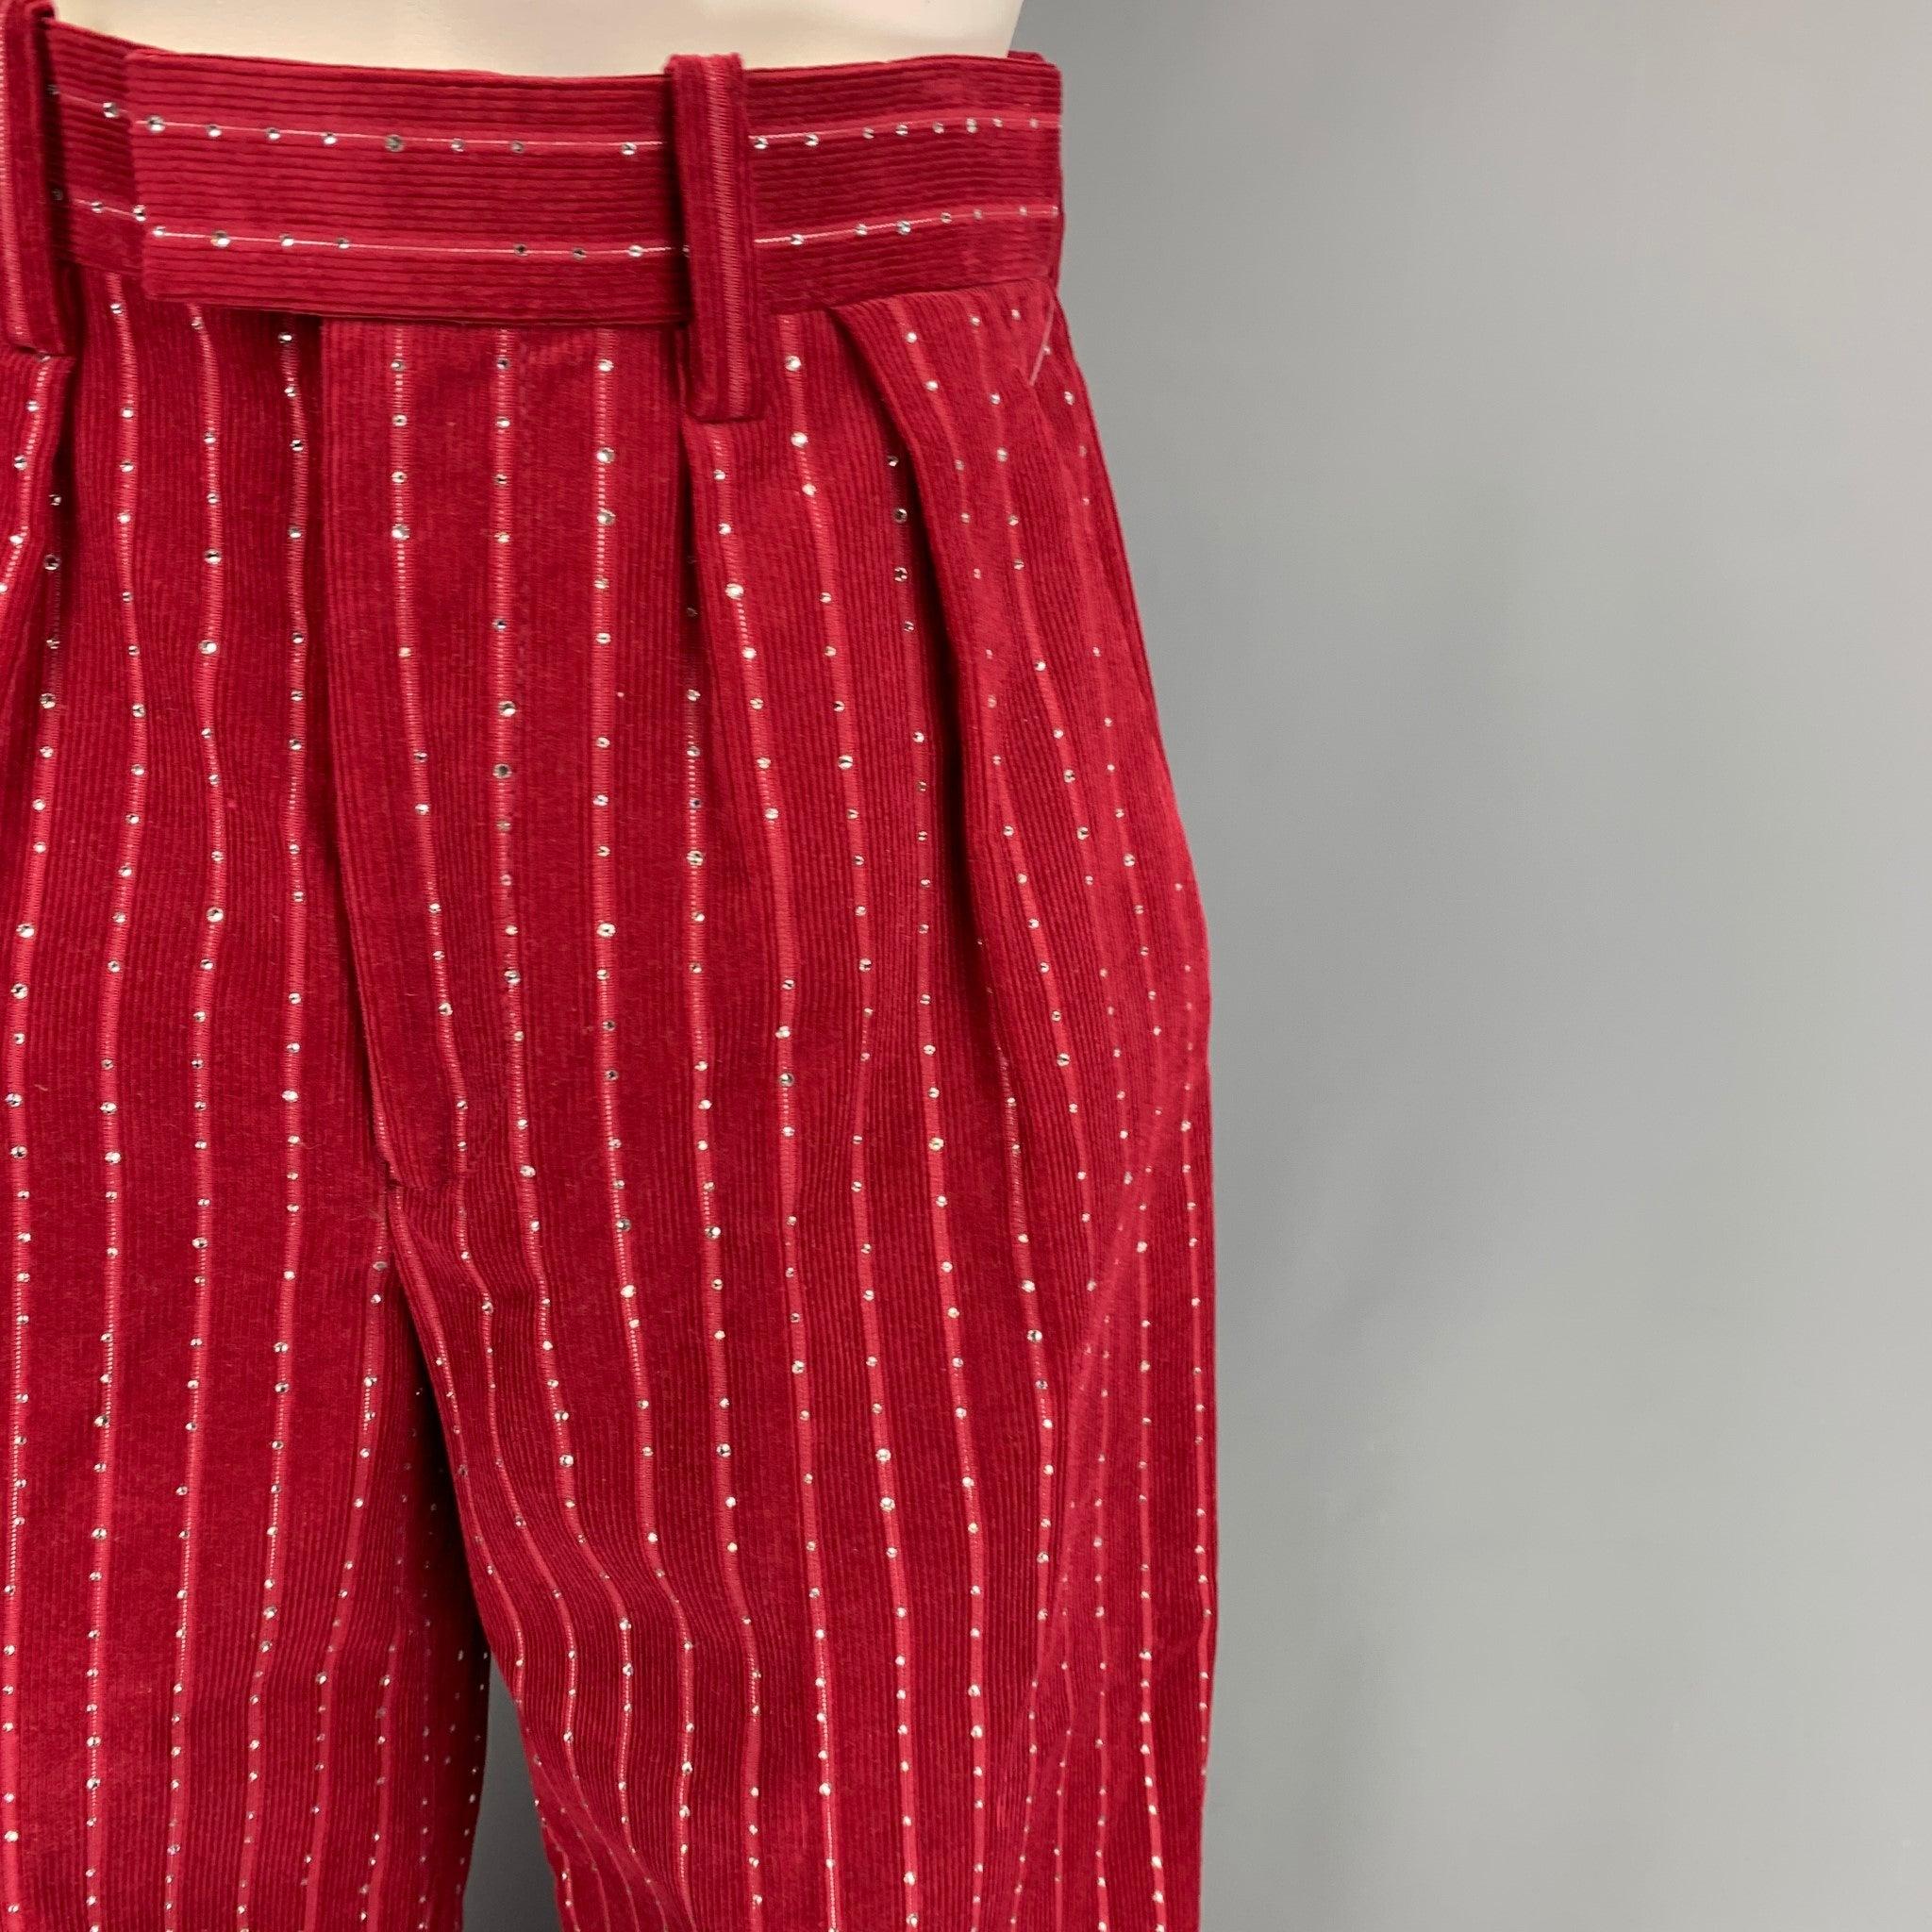 MARC JACOBS RUNWAY Spring 2020 pants comes in a burgundy corduroy cotton / lurex featuring crystal embellishment throughout, wide leg, pleated, and a zip fly closure.
Excellent
Pre-Owned Condition. 

Marked:   00 

Measurements: 
  Waist: 26 inches 